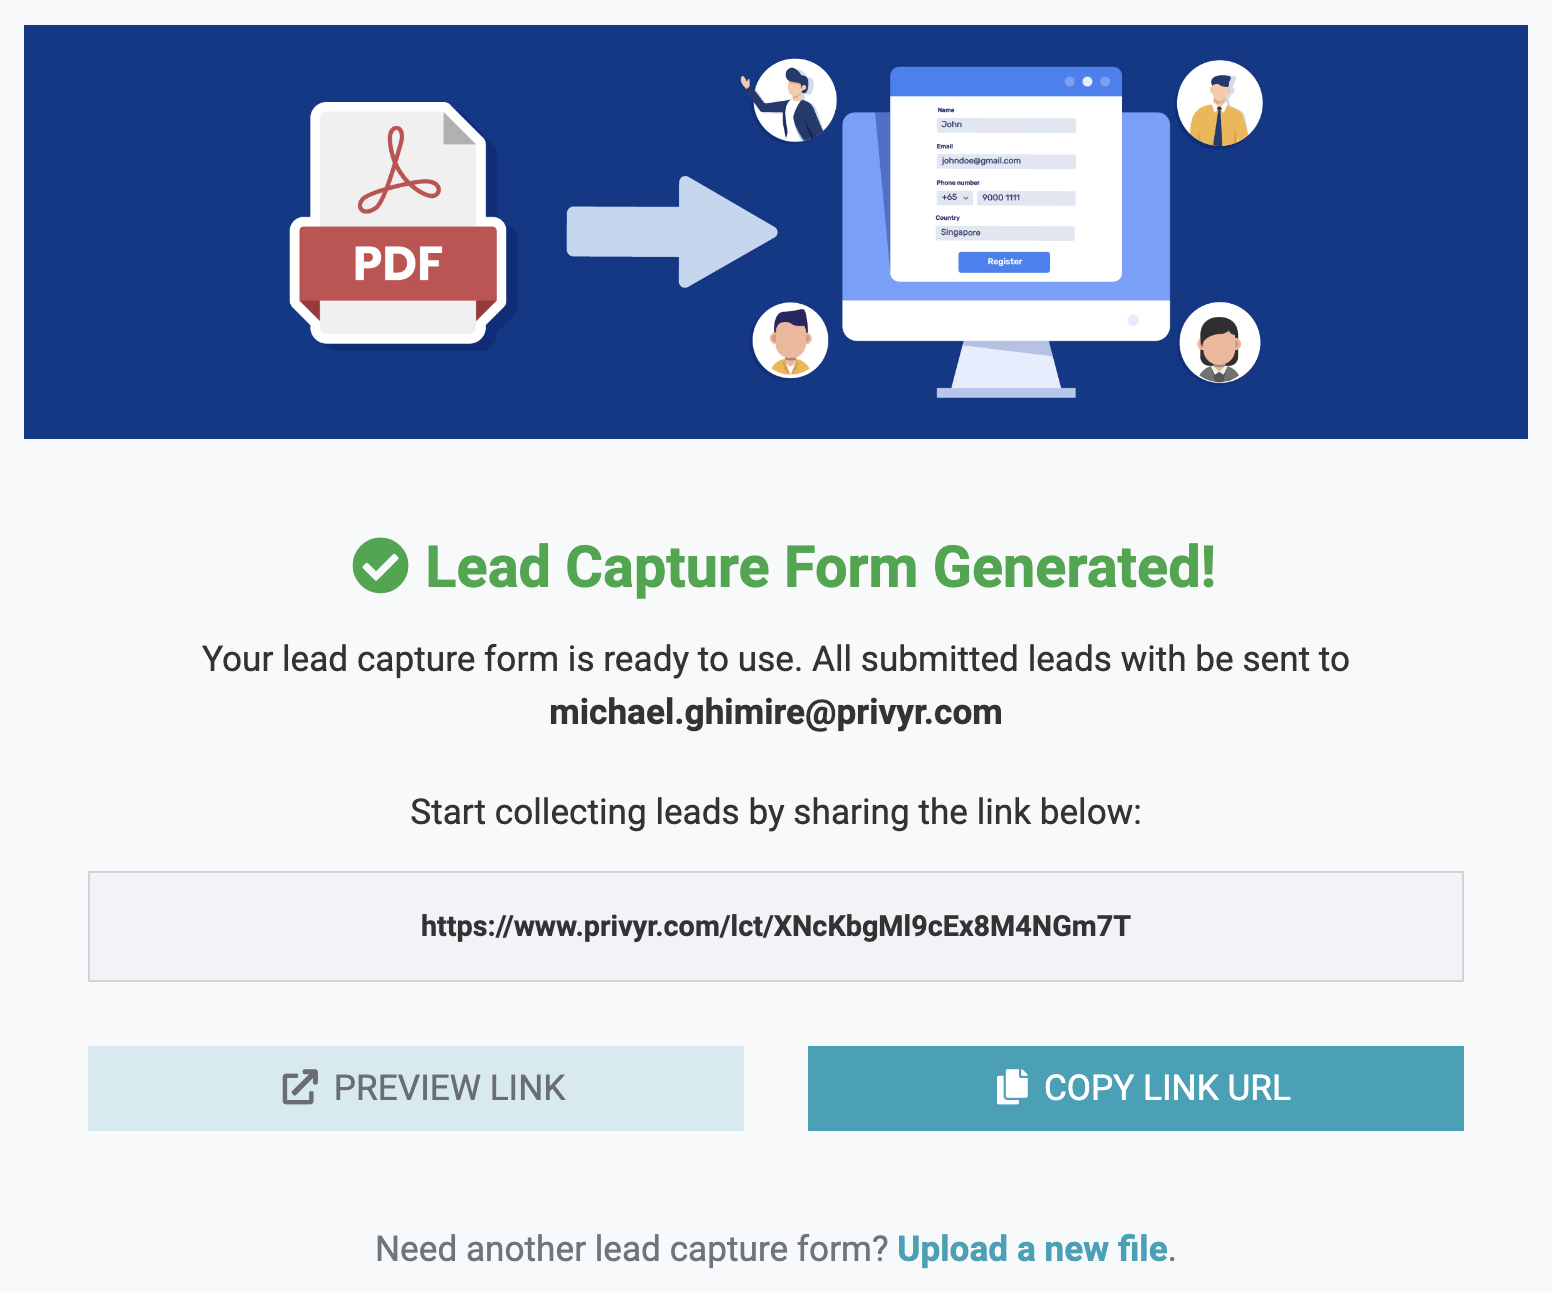 Lead capture form from Privyr